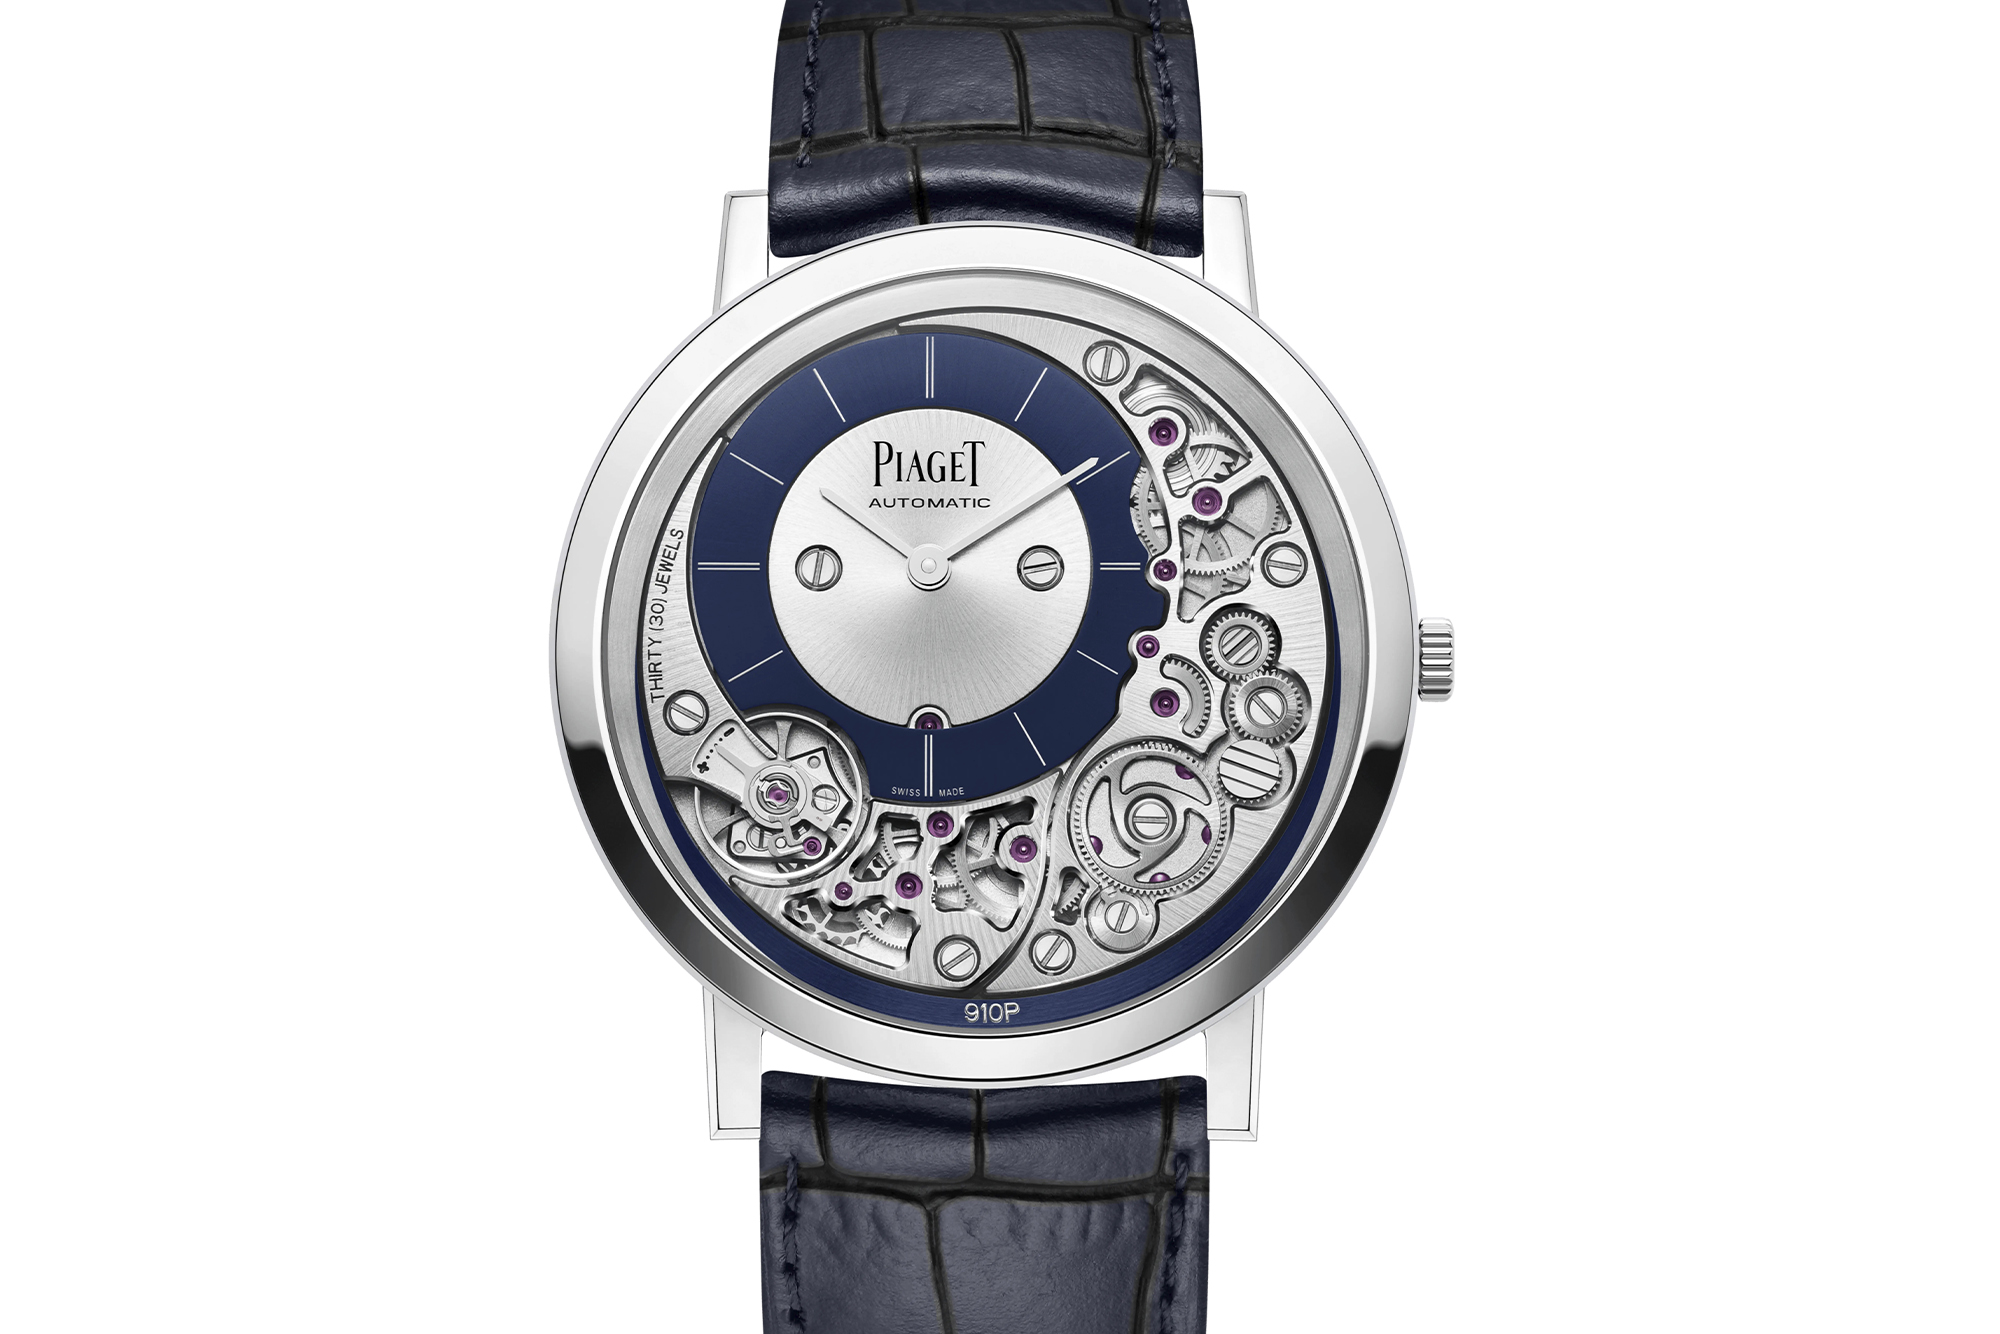 Piaget Altiplano Ultimate Automatic Watch